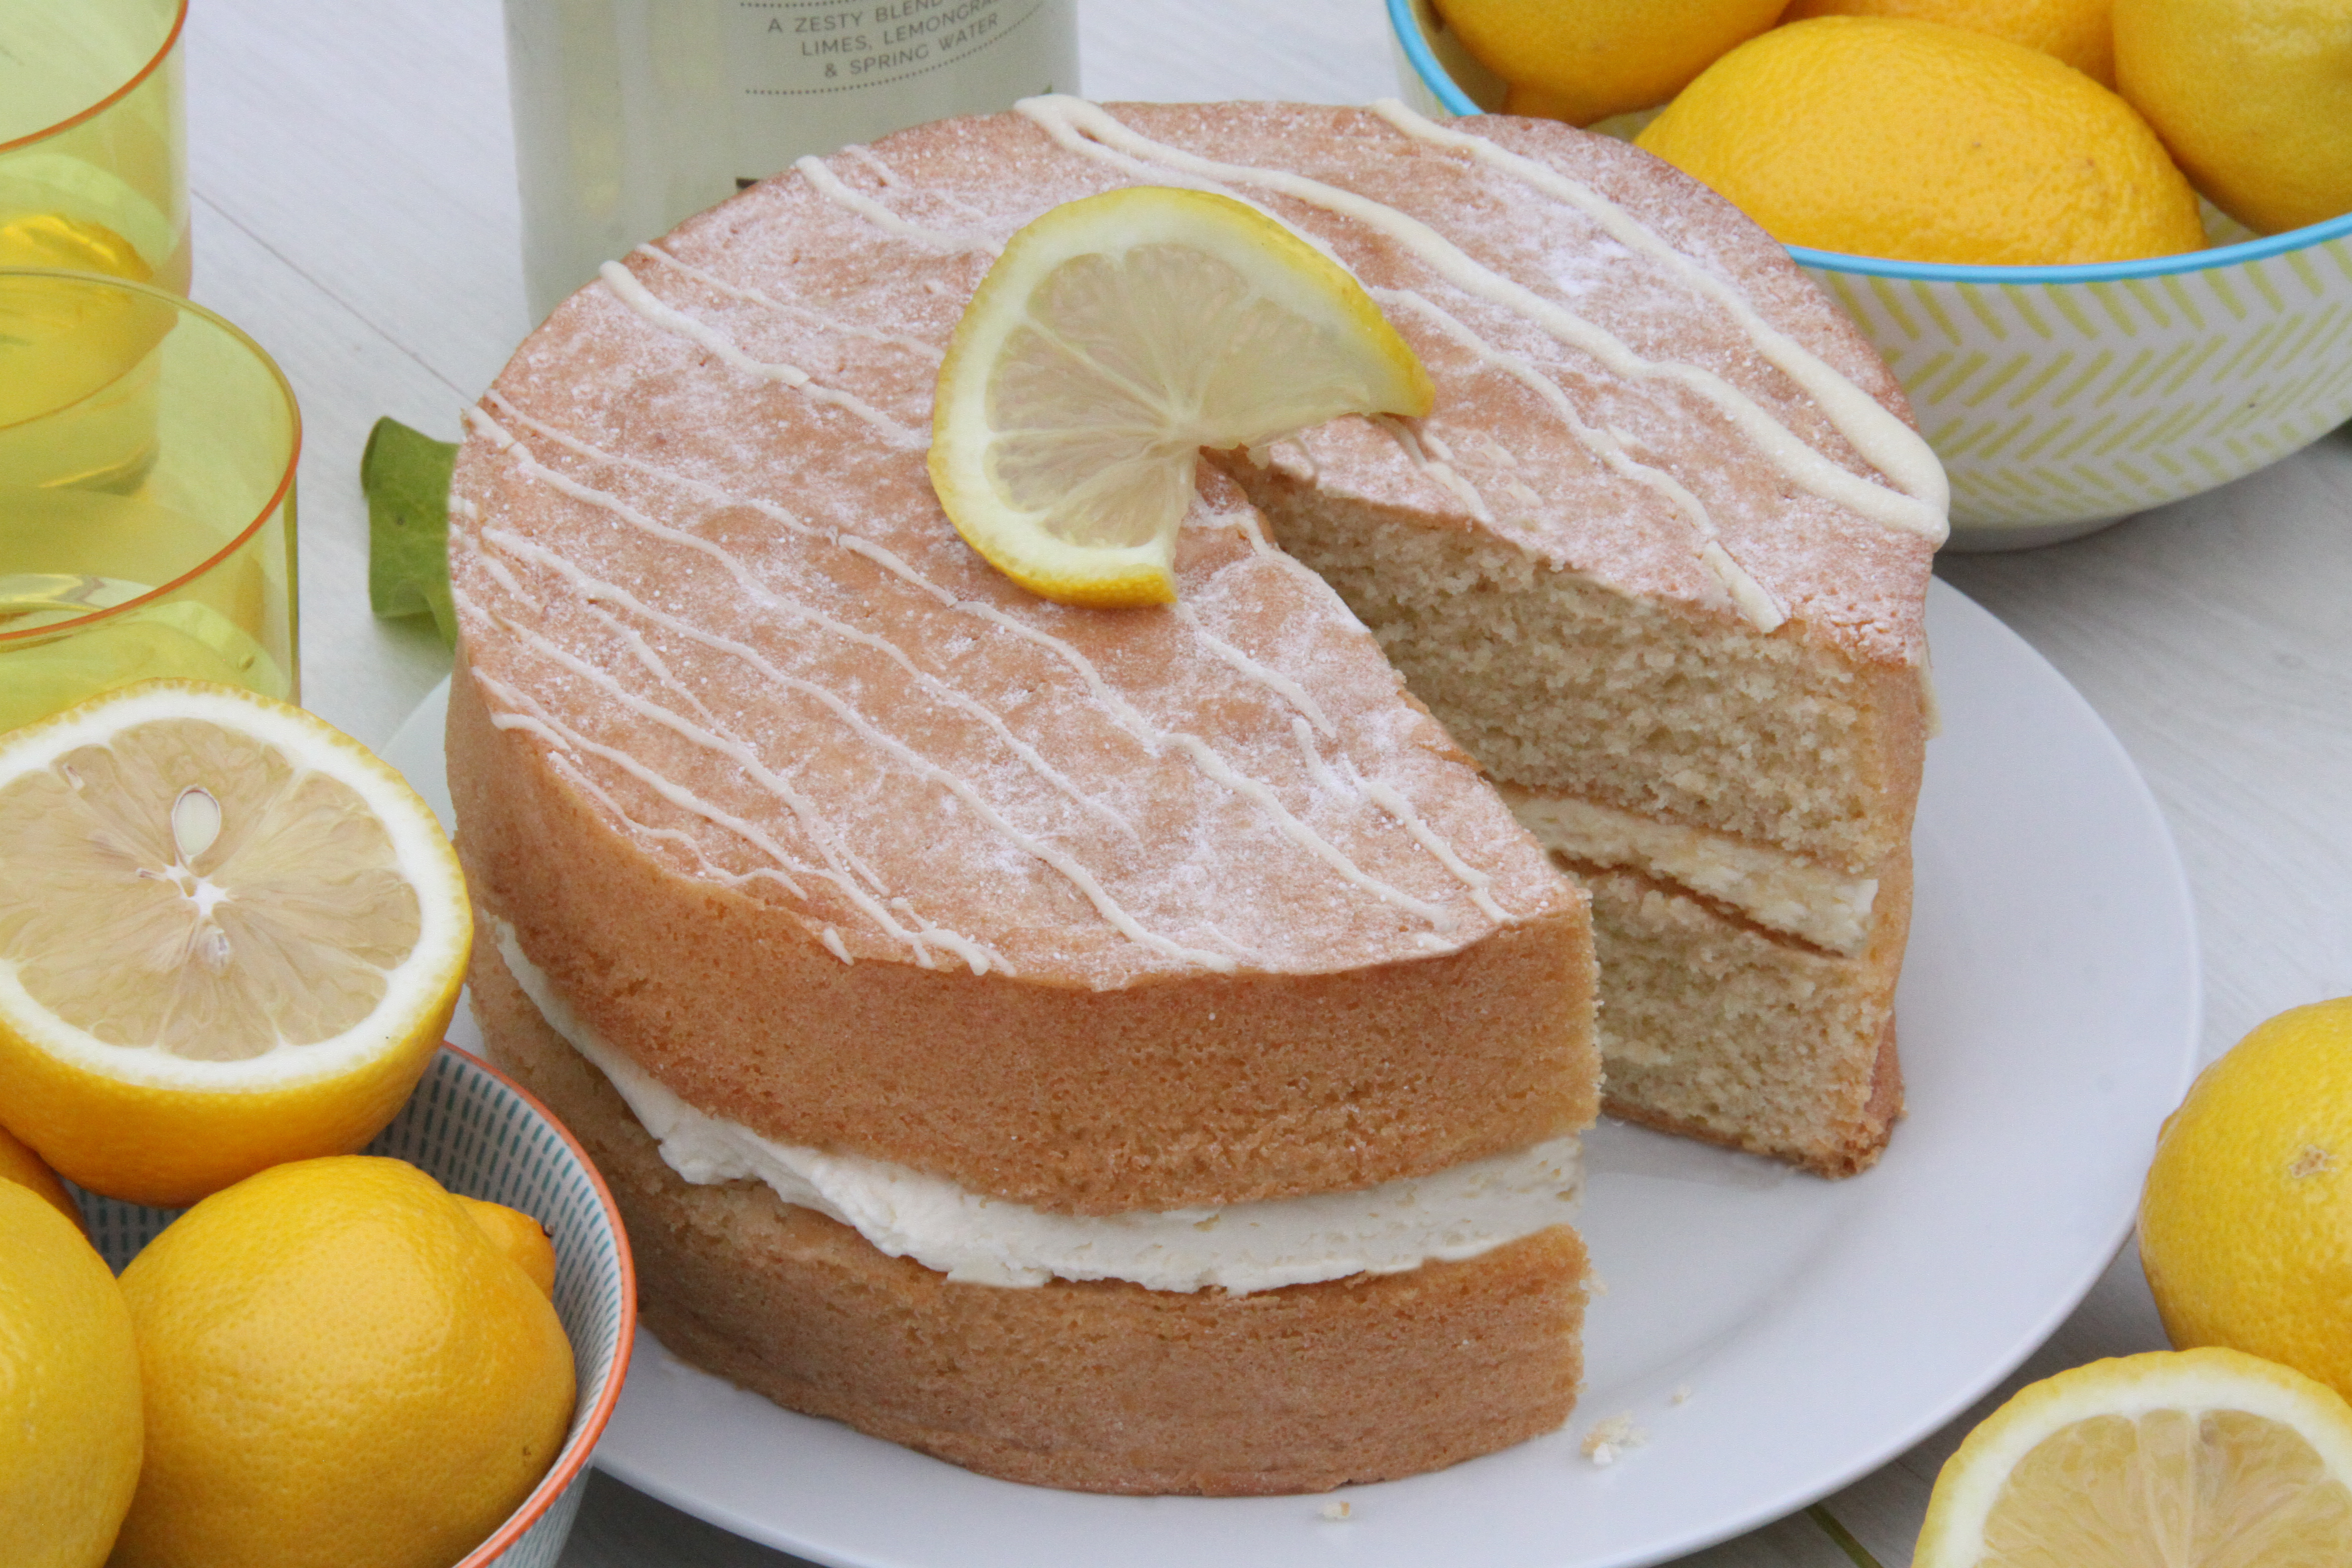 Celebrate the weekend with a Lemon SPONGE Friday! Order by Thursday 2pm for delivery on Friday! Use code: SpongeFriday, £9.99 for a 7 inch Sponge, £16.99 for a 10 inch.